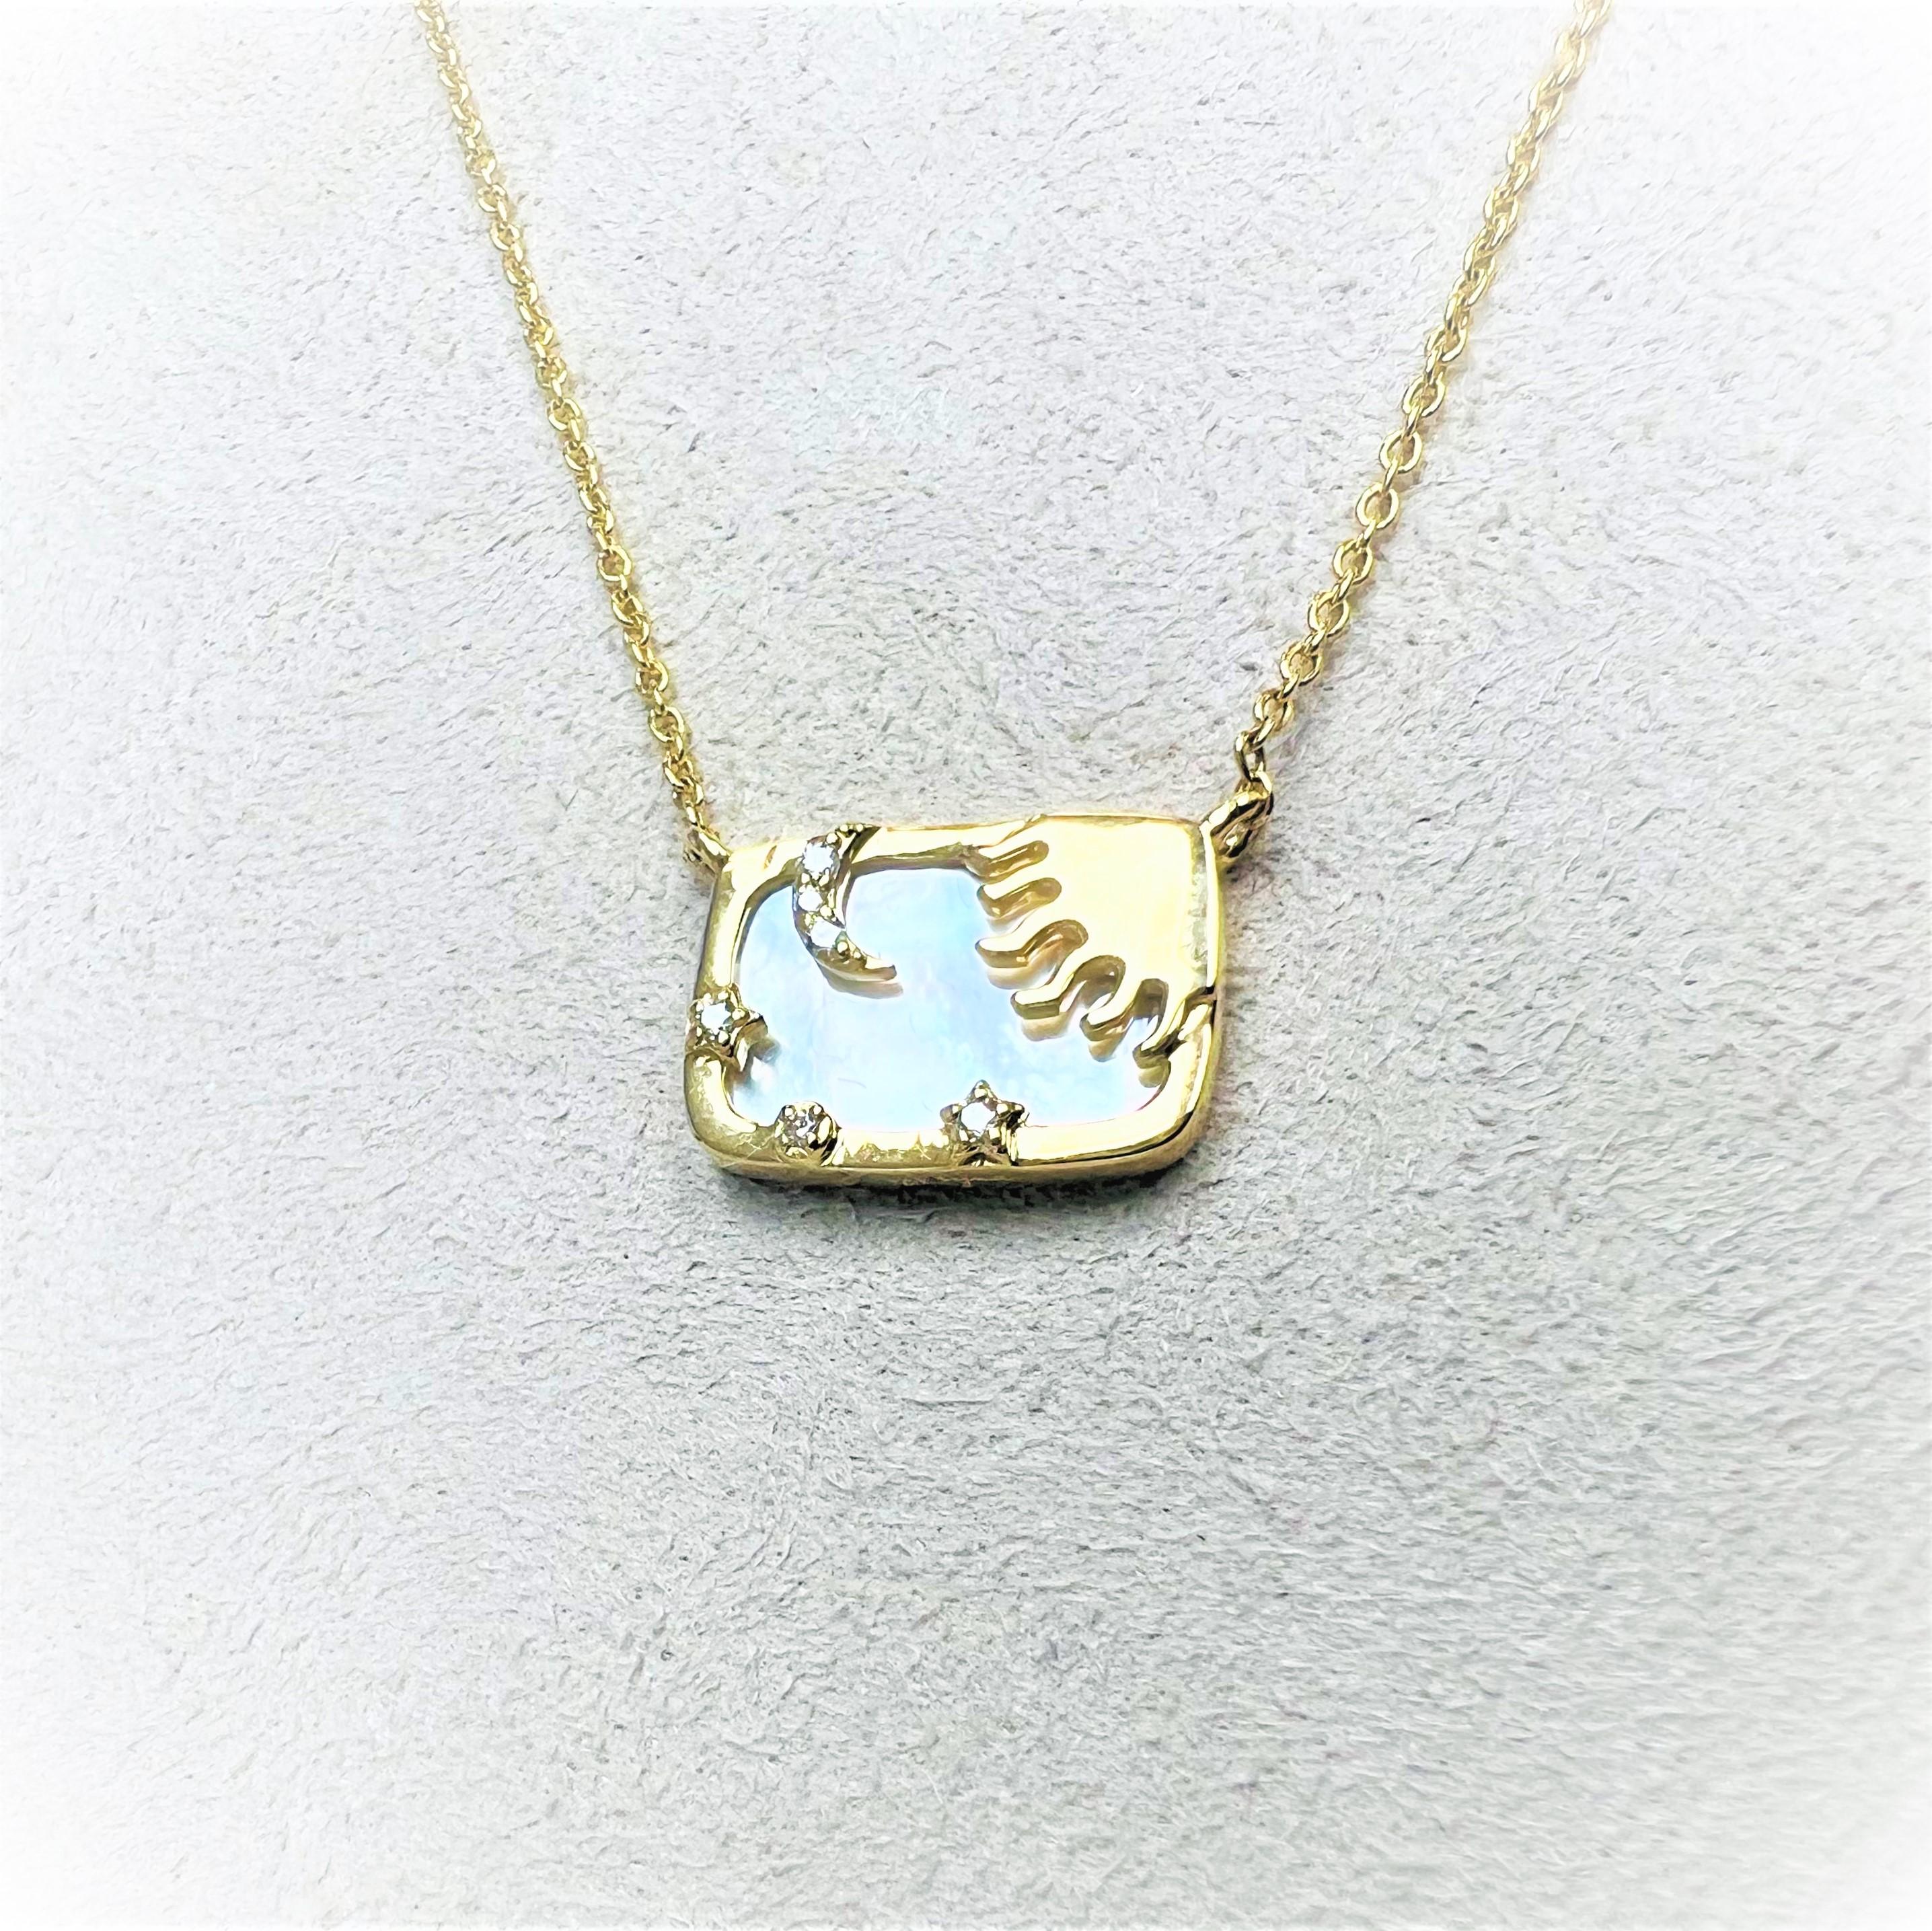 Created in 18 karat yellow gold
Mother of pearl 2 carats approx.
Diamonds 0.04 carat approx.
18 inch length, adjustable at 16-17
Lobster clasp
Limited edition

Crafted from 18 karat yellow gold, this limited edition necklace features a 2-carat